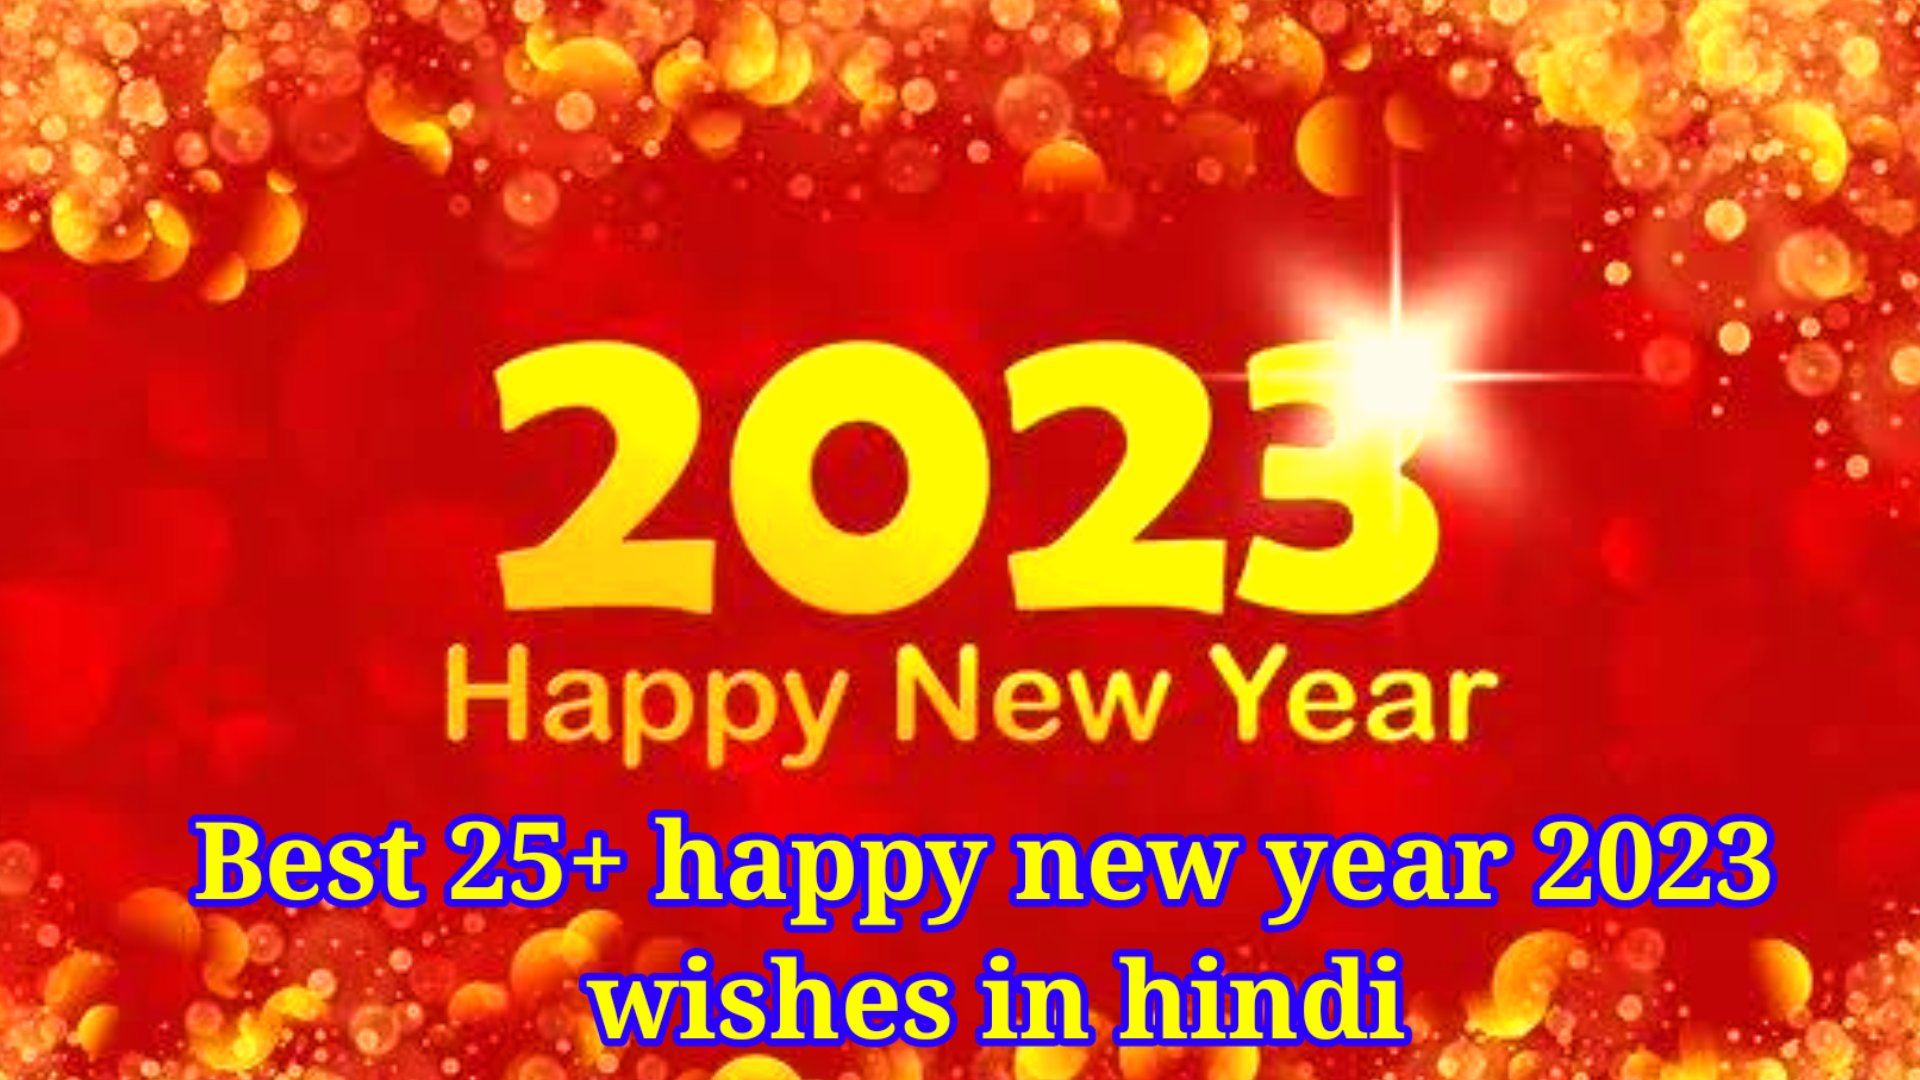 Best 25+ happy new year 2023 wishes in hindi